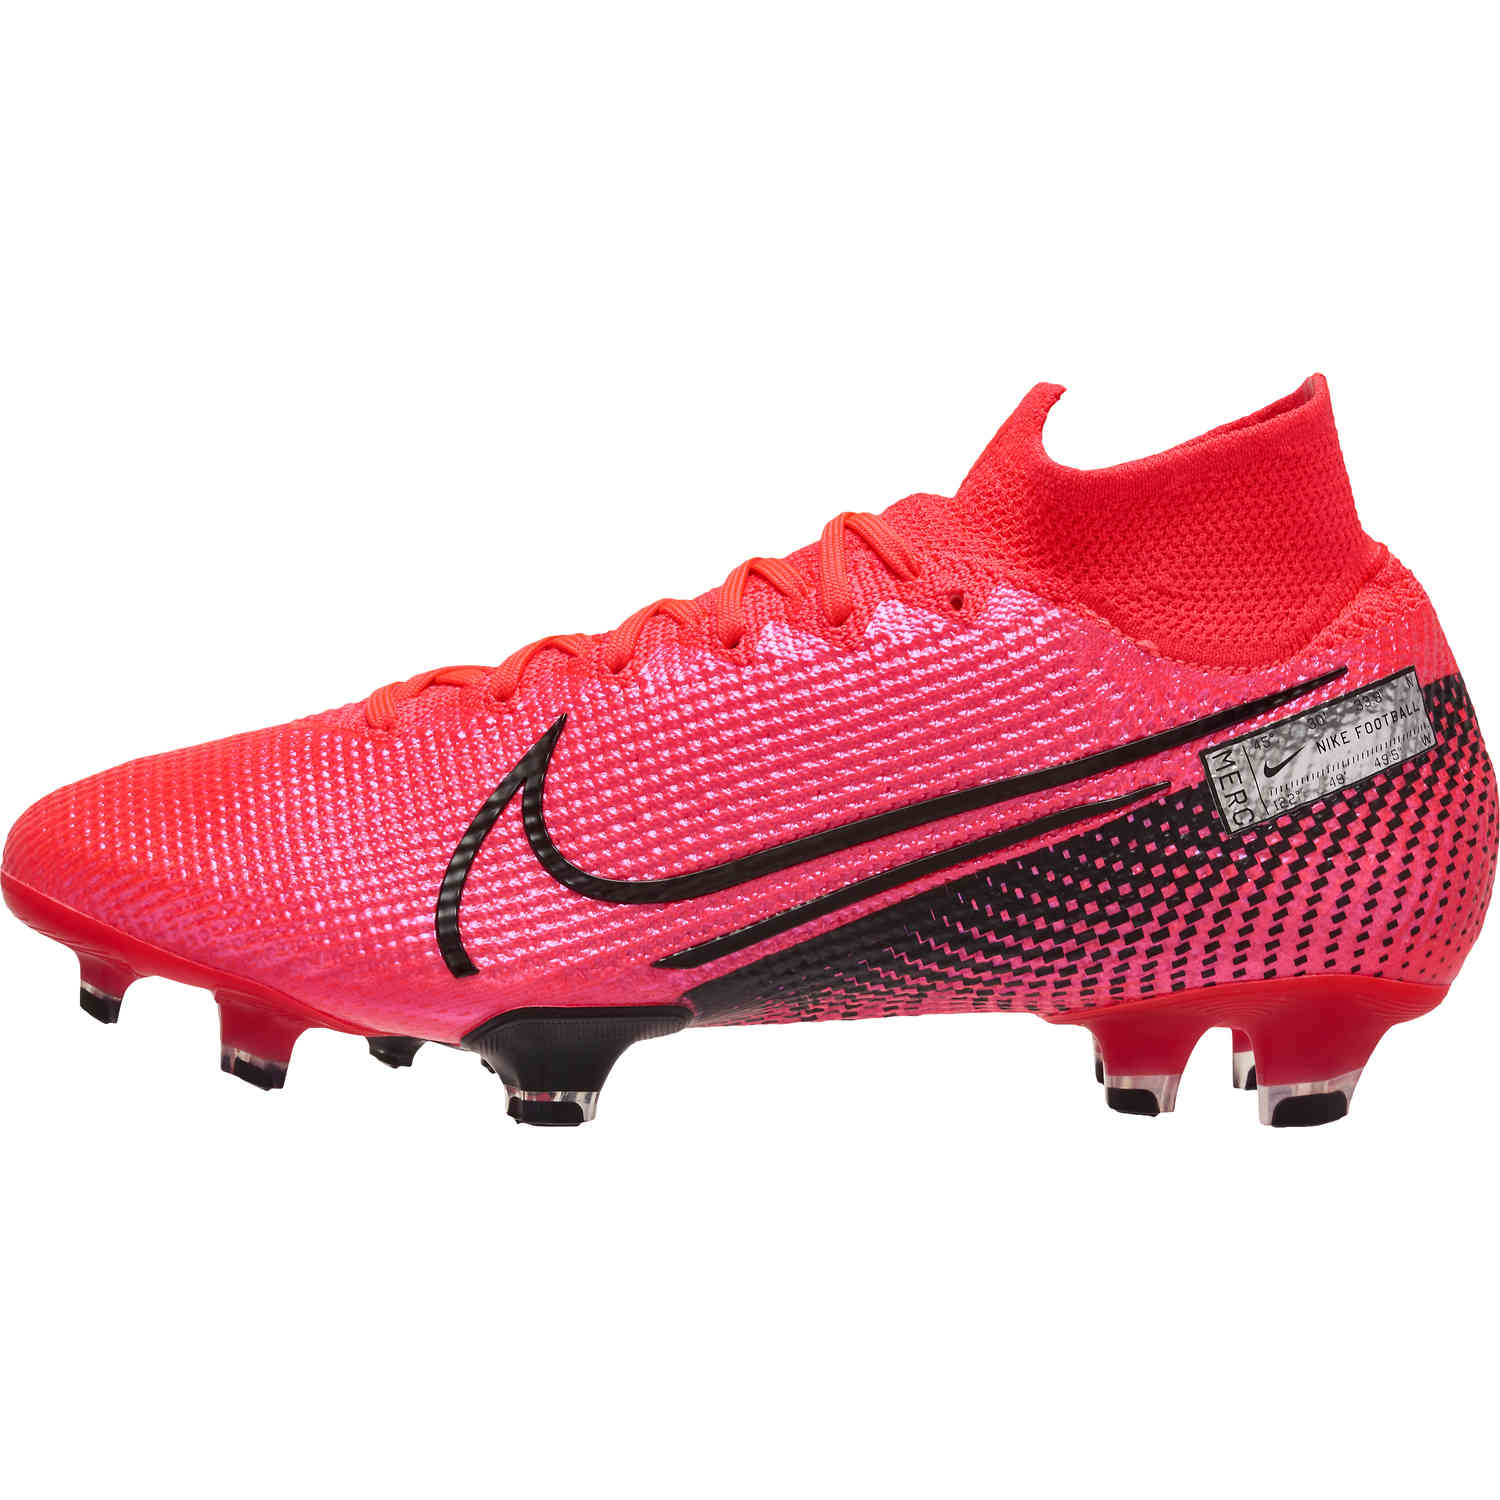 hot pink nike soccer cleats